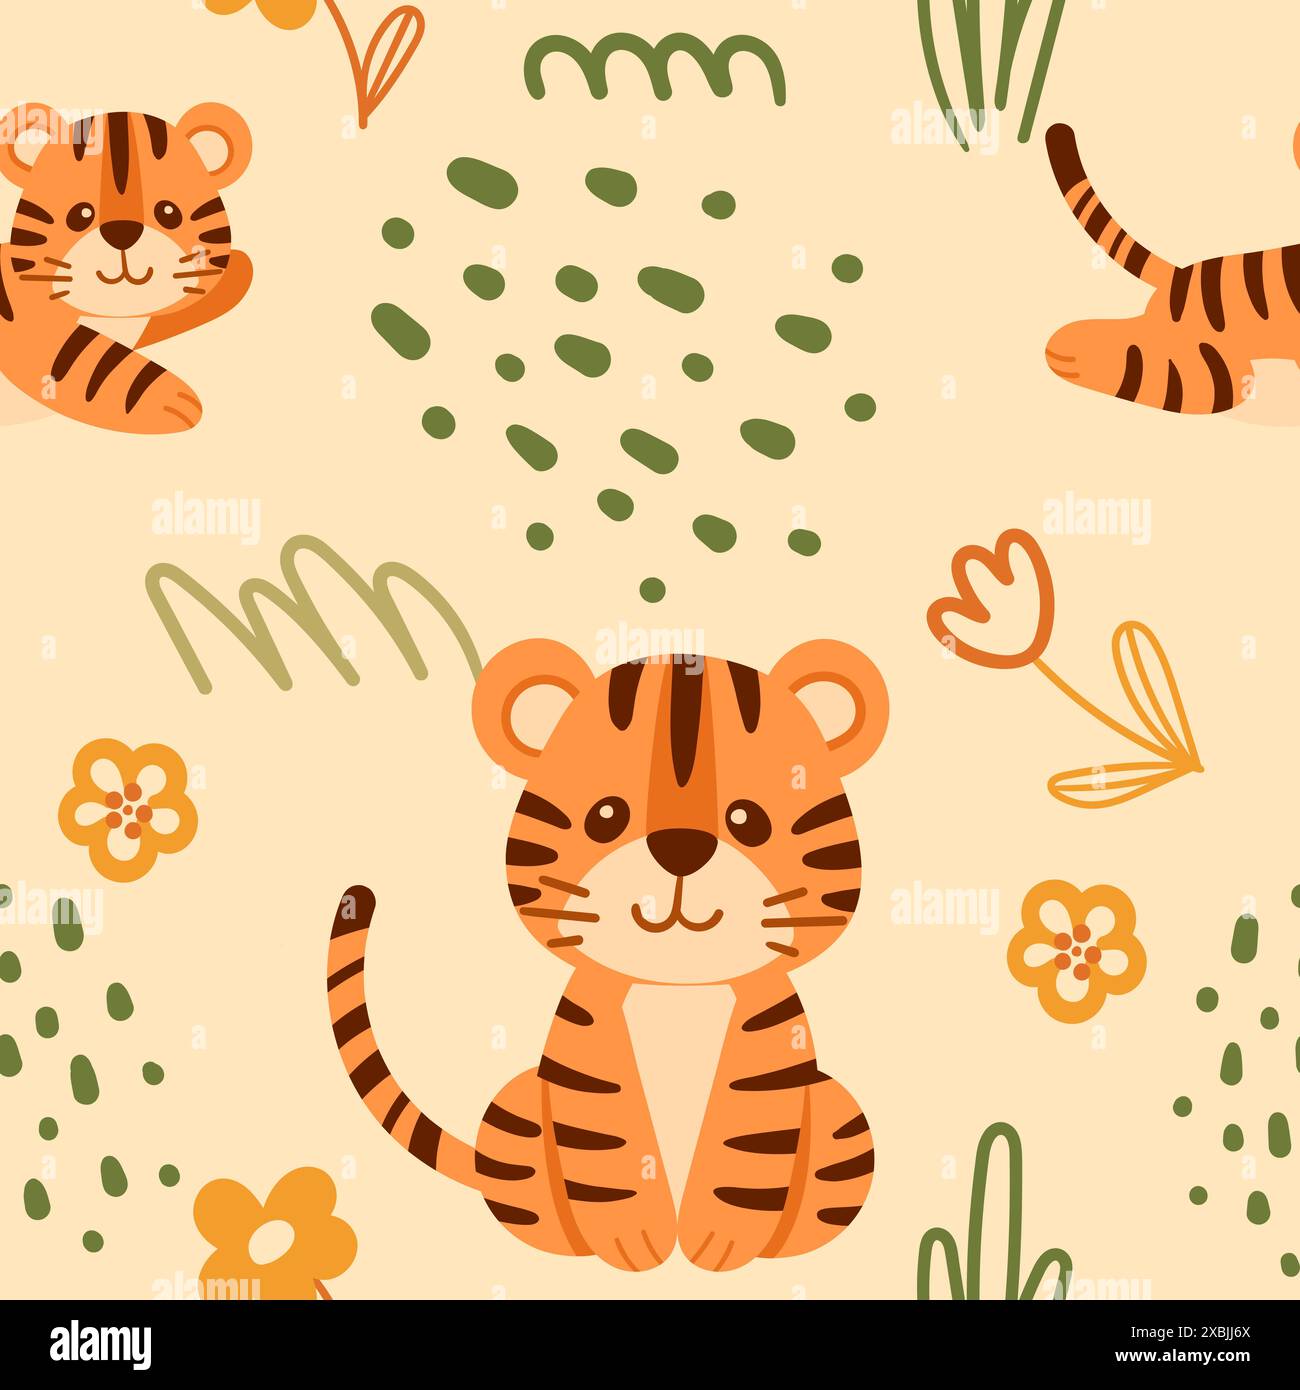 Seamless pattern cute small tiger cub green leaves cartoon animal design vector illustration on beige background. Stock Vector